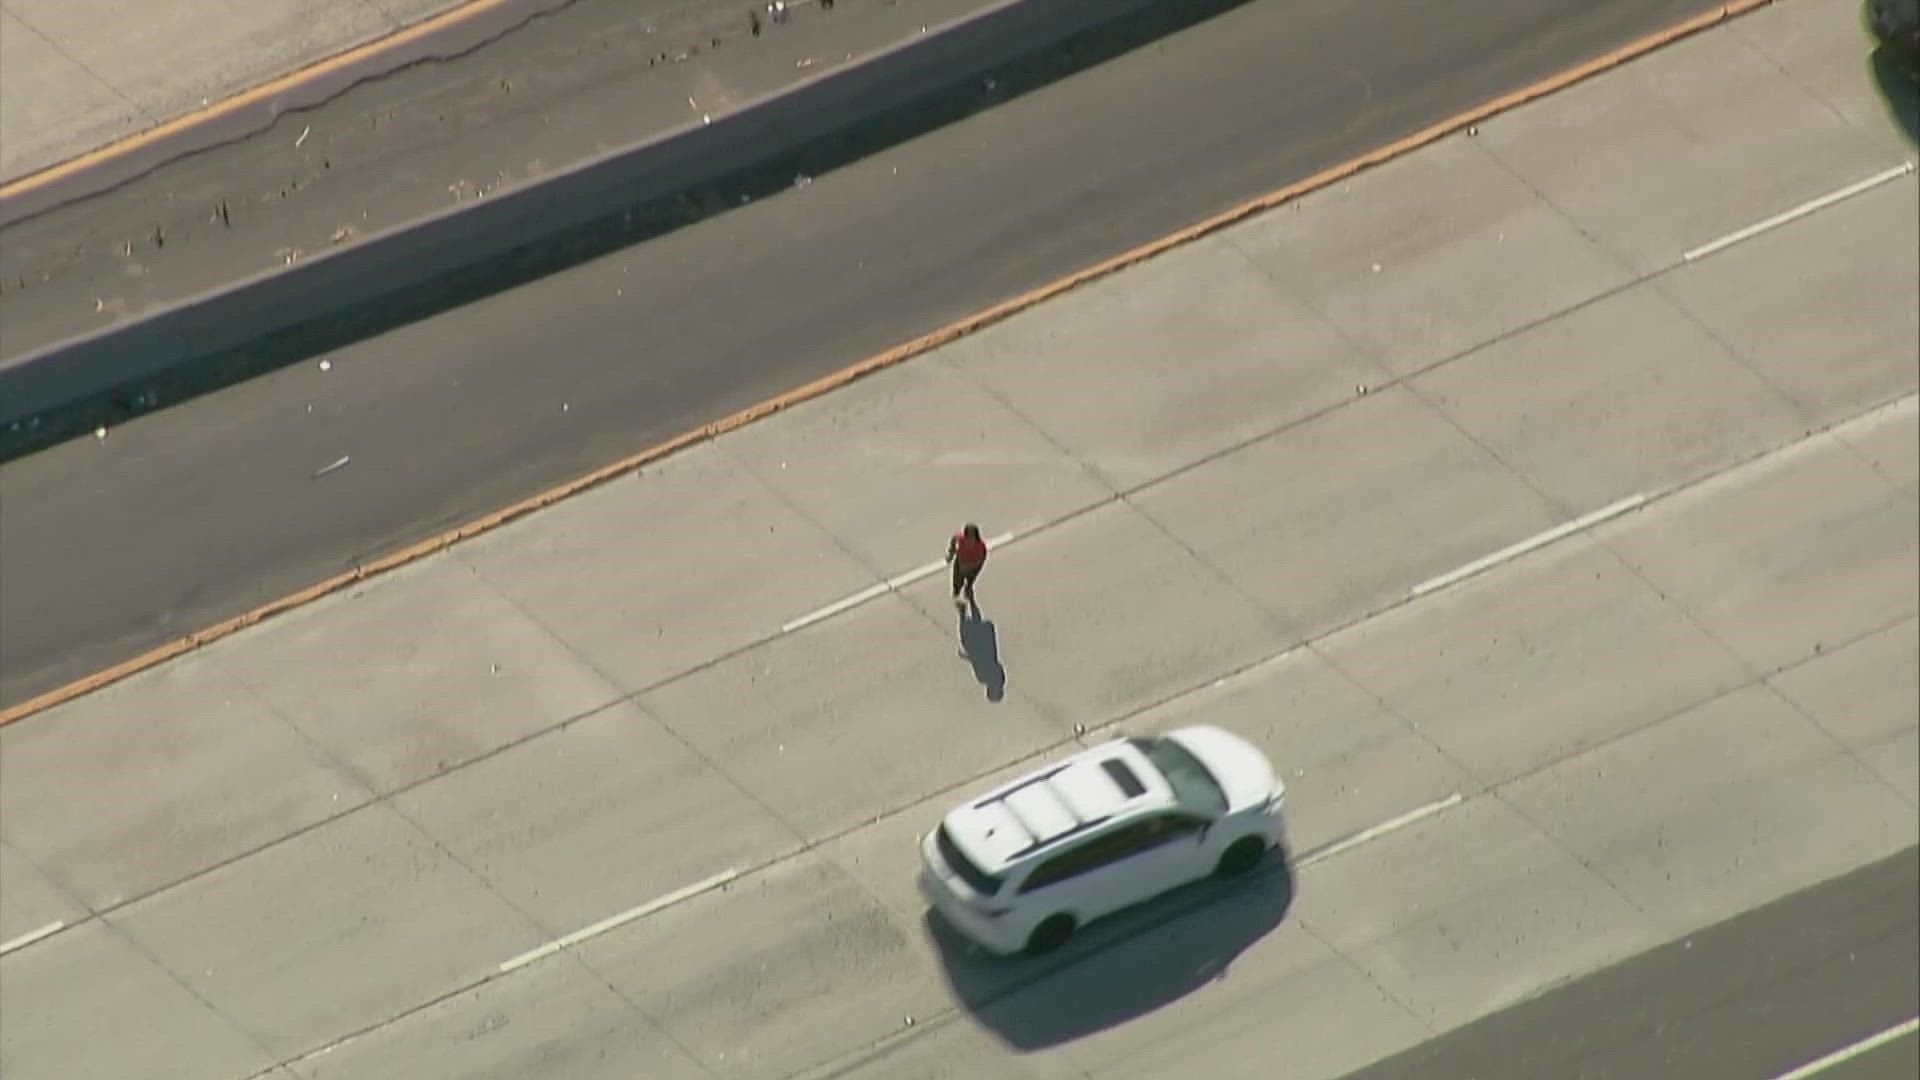 A vehicle pursuit ended on I-15 on Thursday afternoon.